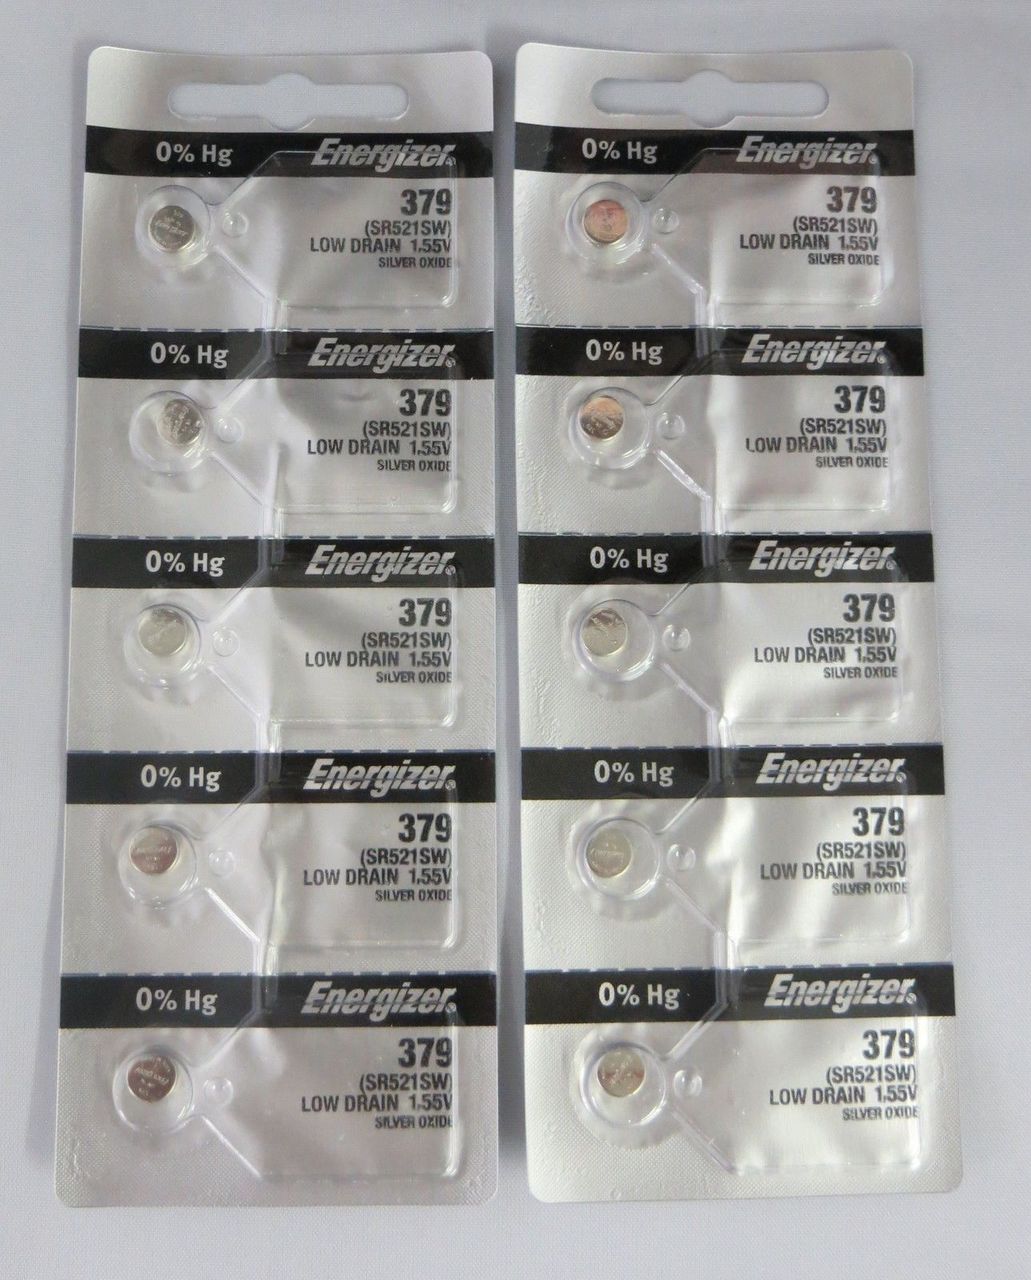 Energizer 379 - SR521 Silver Oxide Button Battery 1.55V - 100 Pack + FREE SHIPPING!